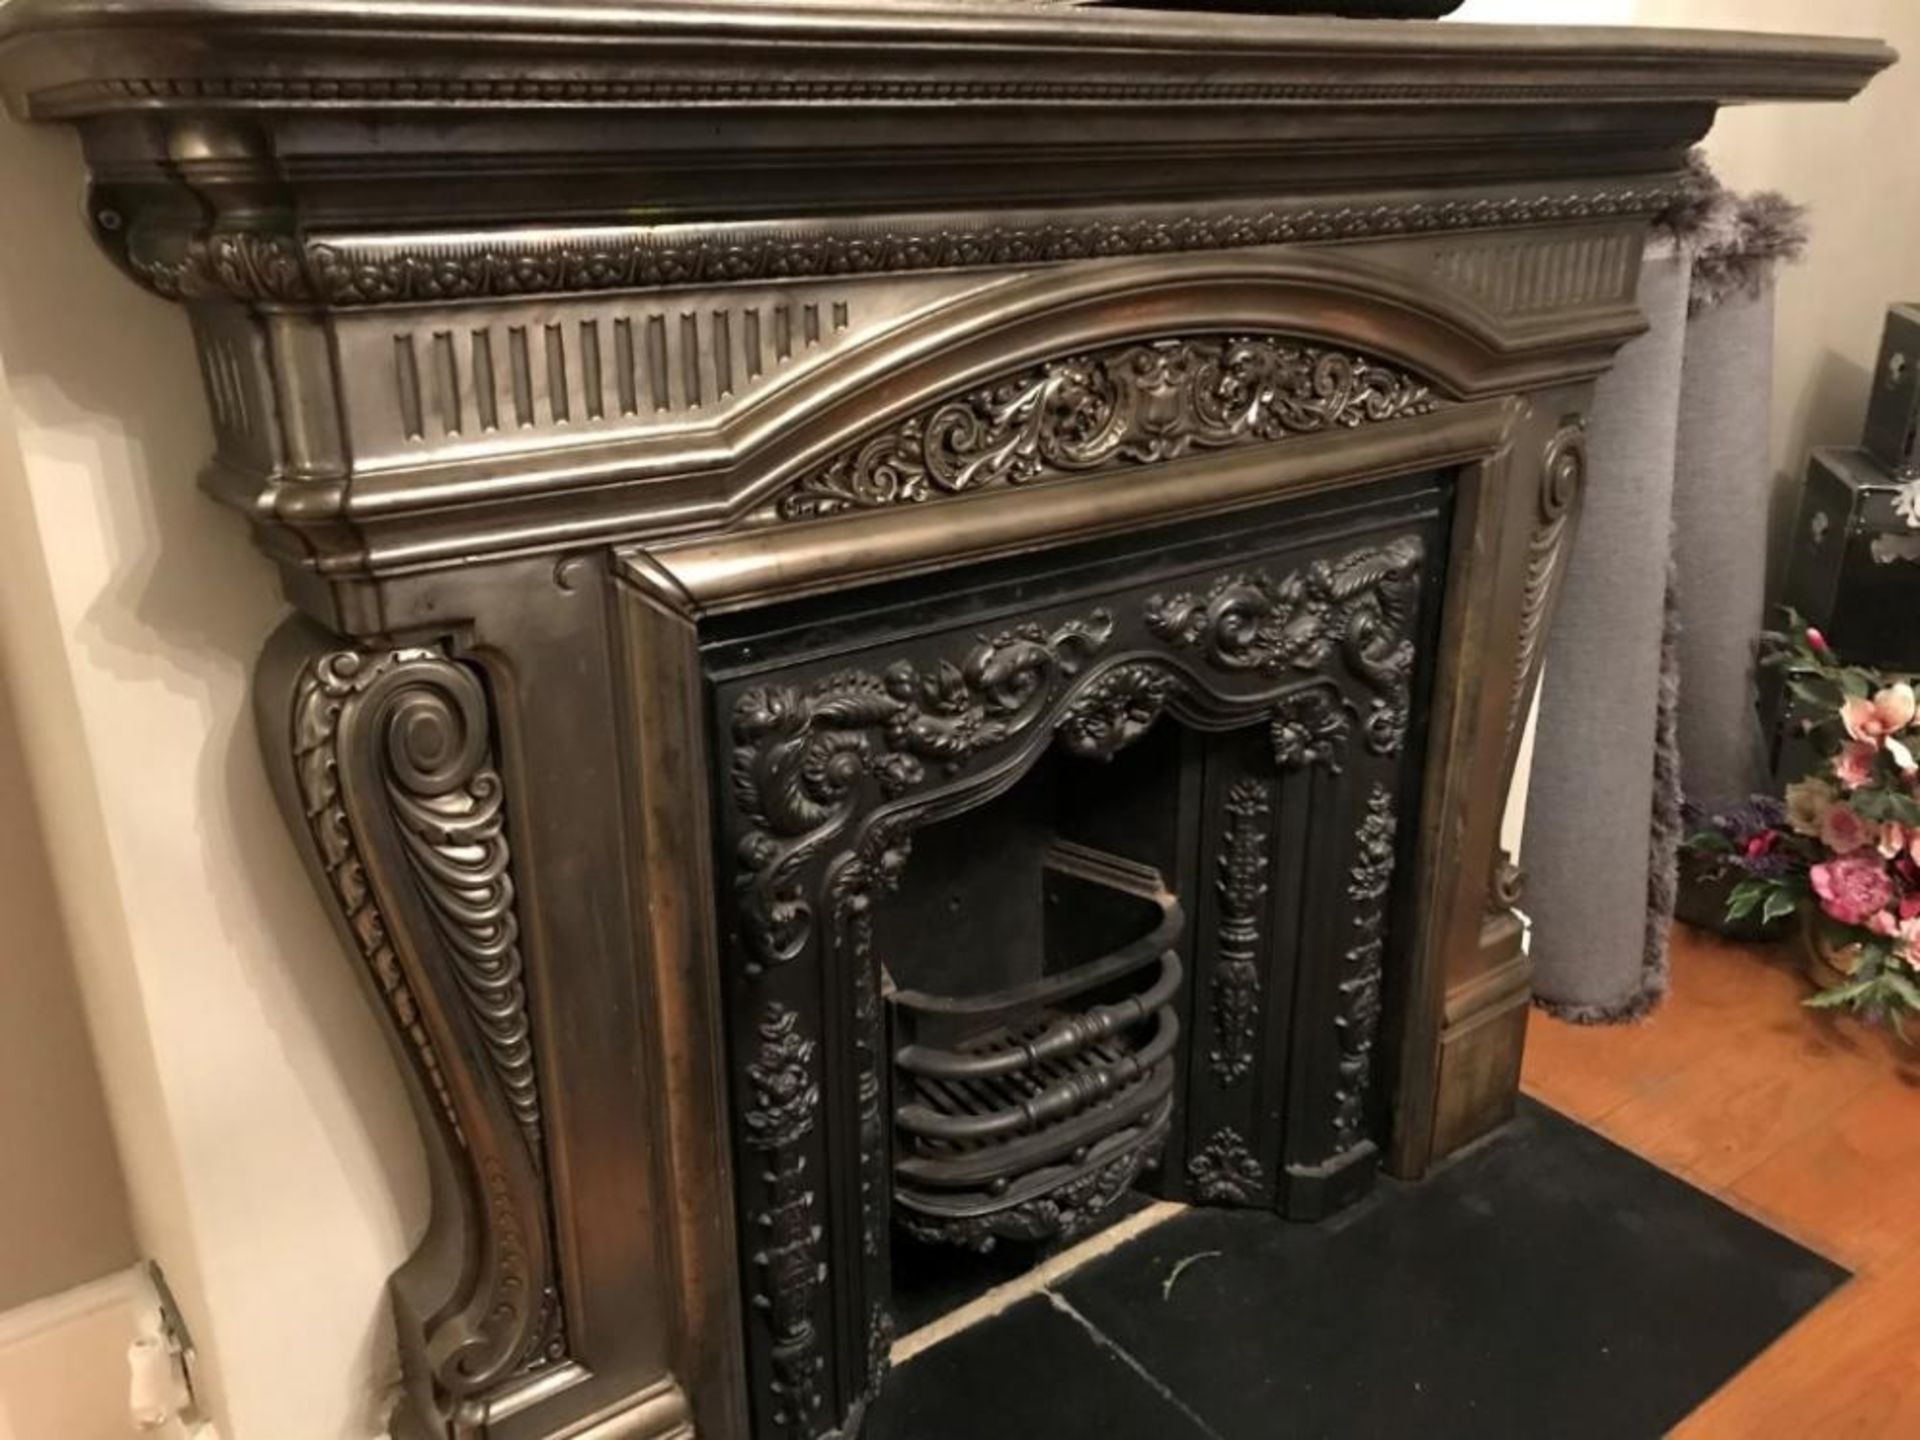 1 x Ultra Rare Antique Victorian Cast Iron Fireplace Ornamental Detail Surrounding And Insert - - Image 11 of 20